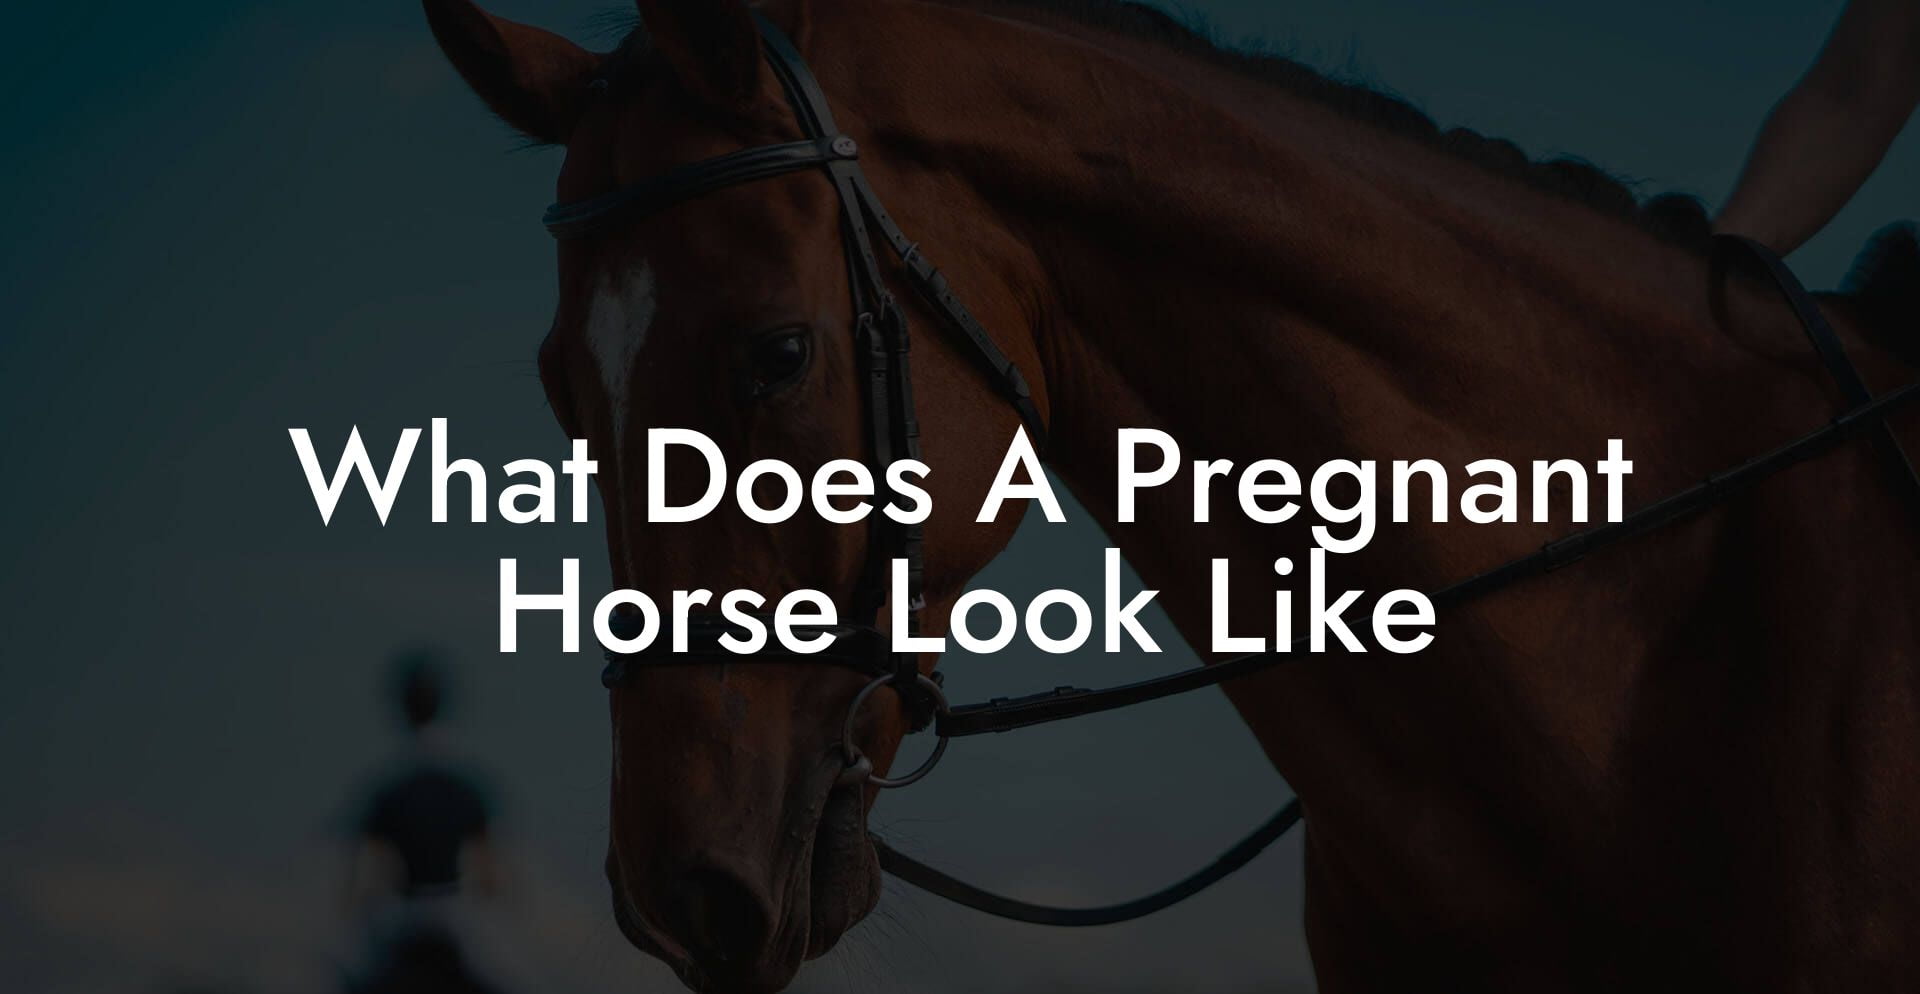 What Does A Pregnant Horse Look Like